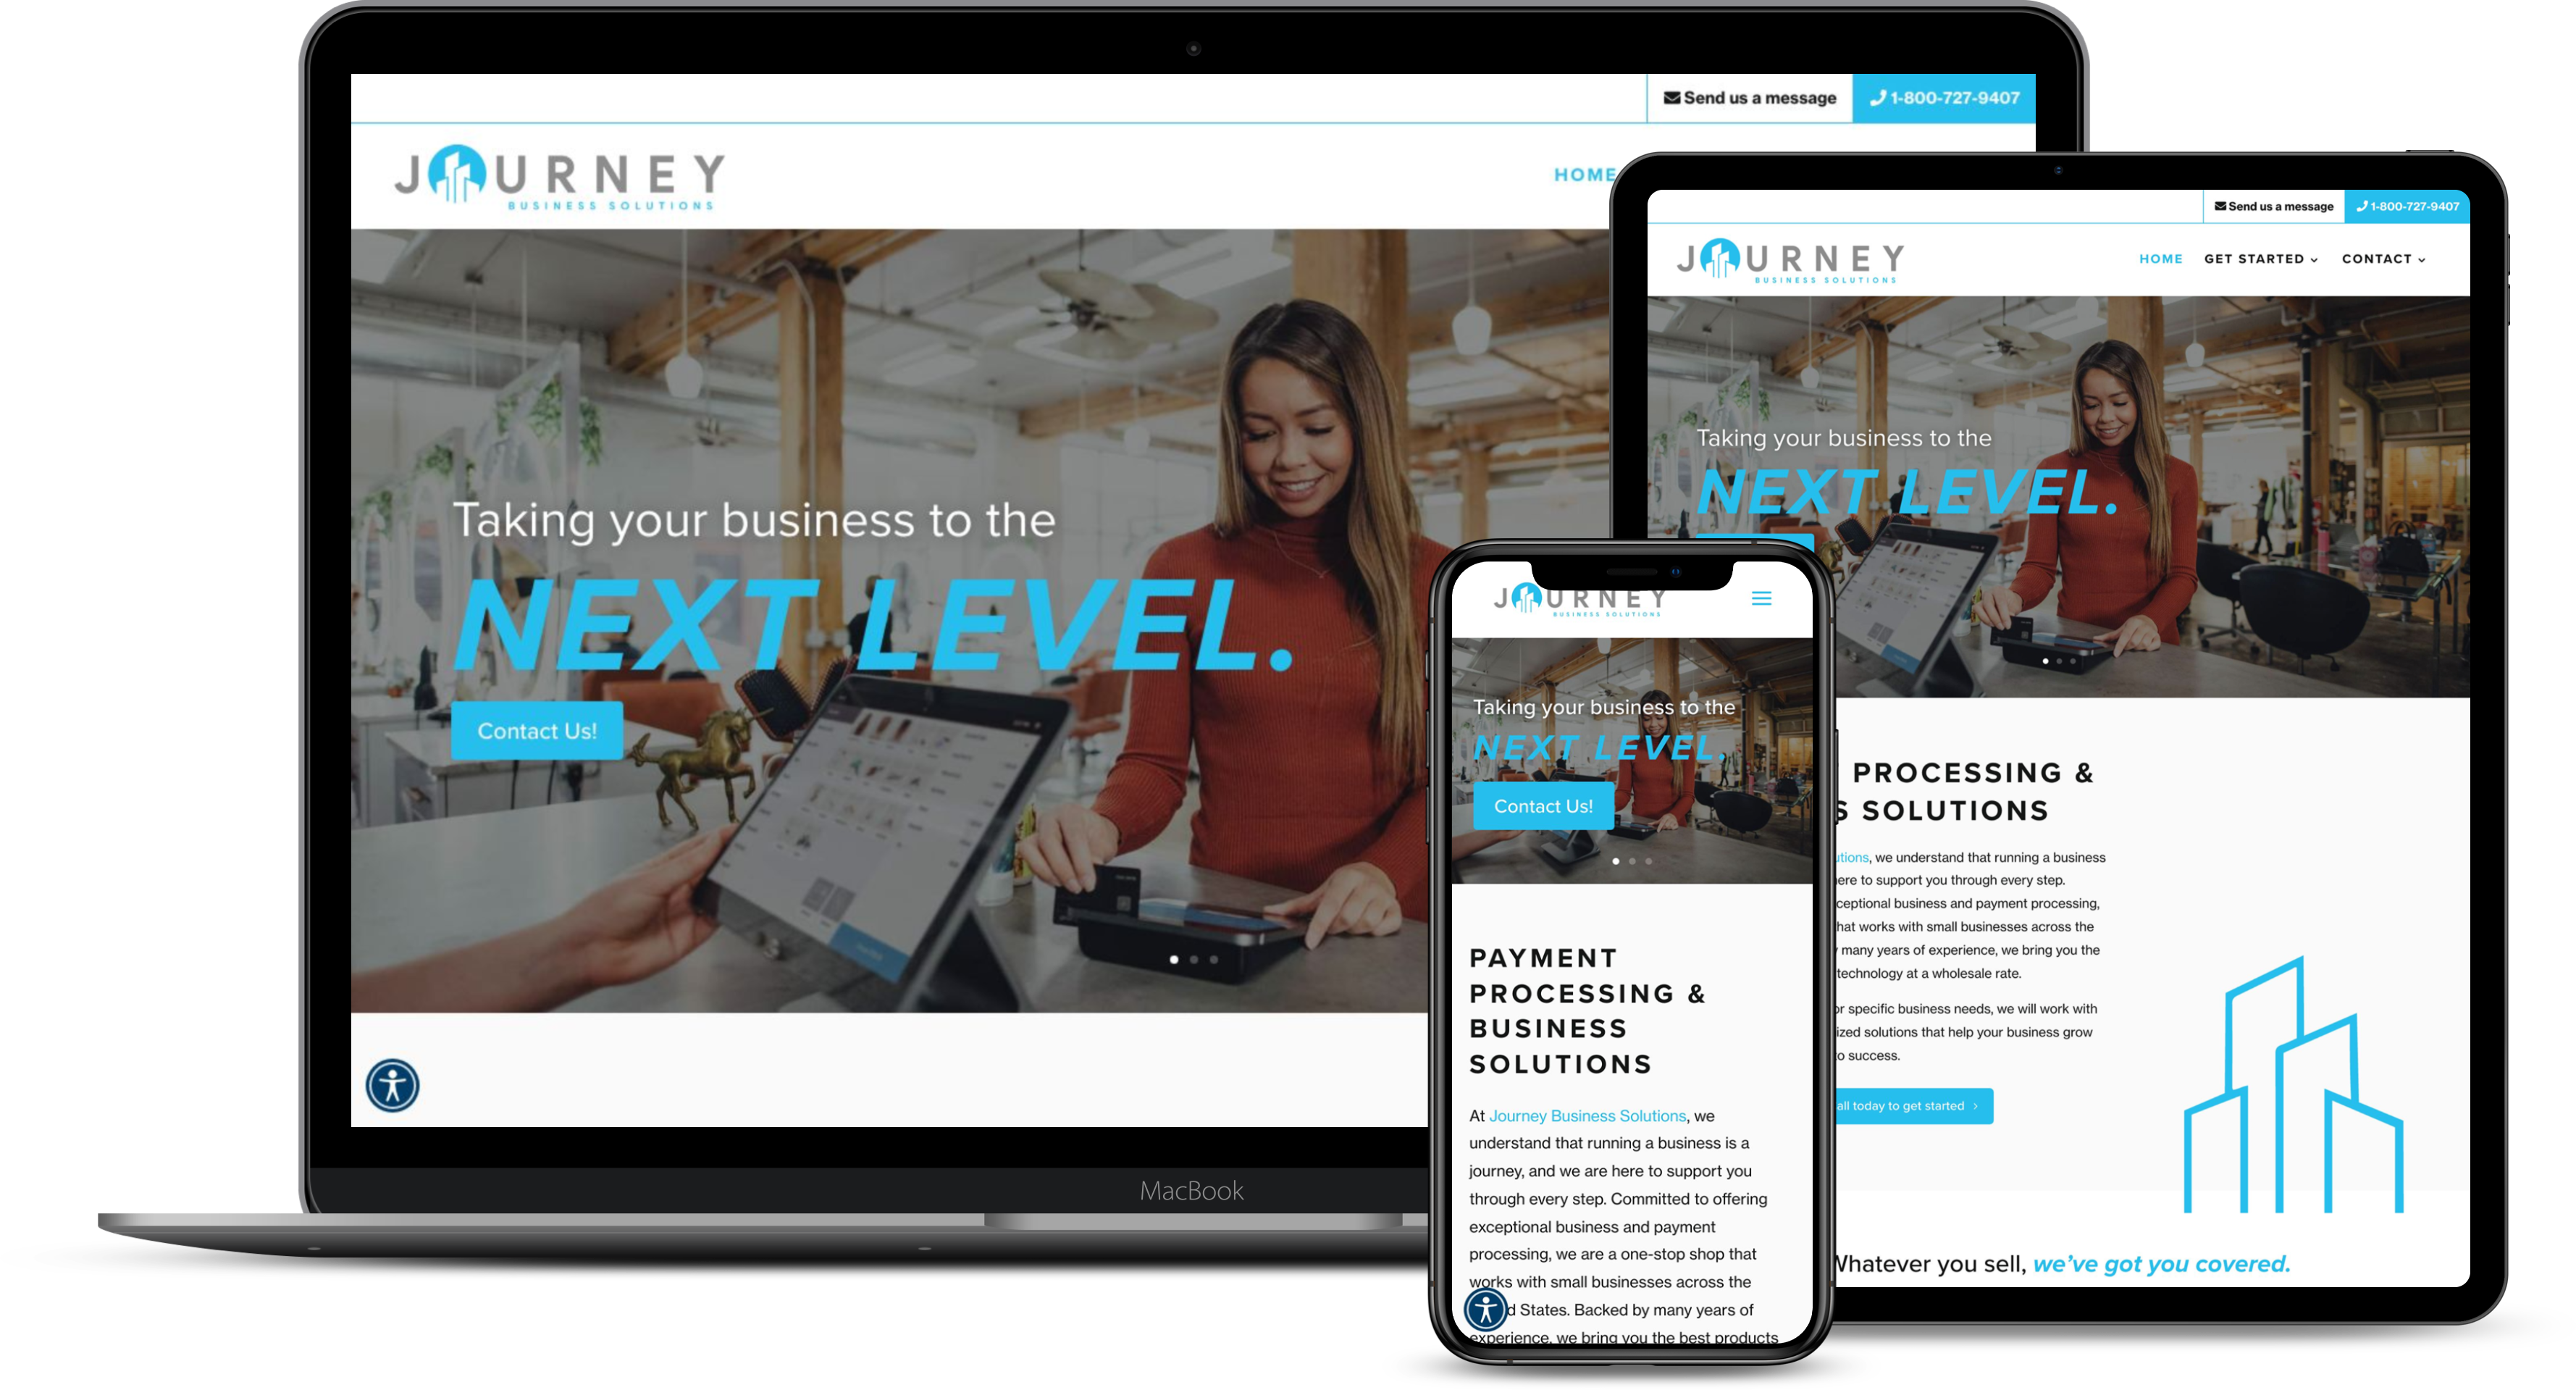 Journey Business Solutions